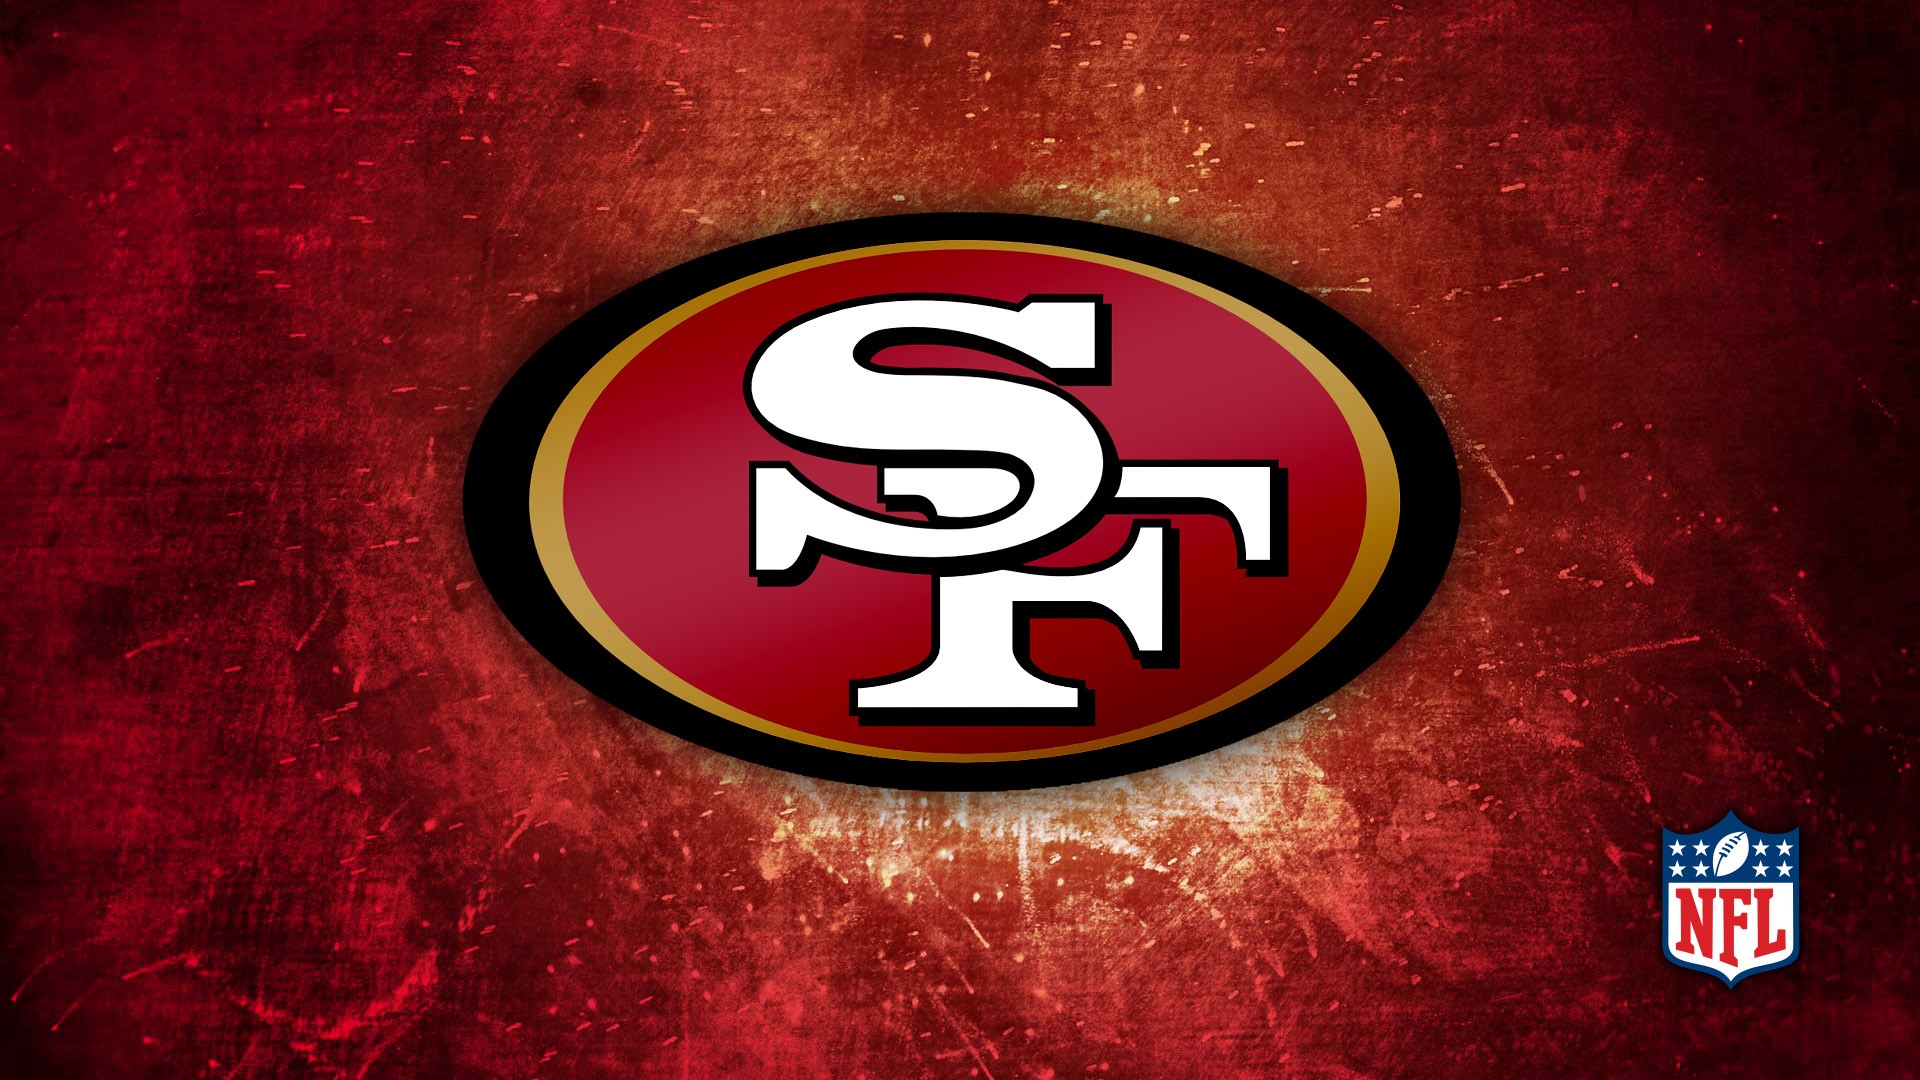 HD Backgrounds San Francisco 49ers with high-resolution 1920x1080 pixel. You can use this wallpaper for your Mac or Windows Desktop Background, iPhone, Android or Tablet and another Smartphone device